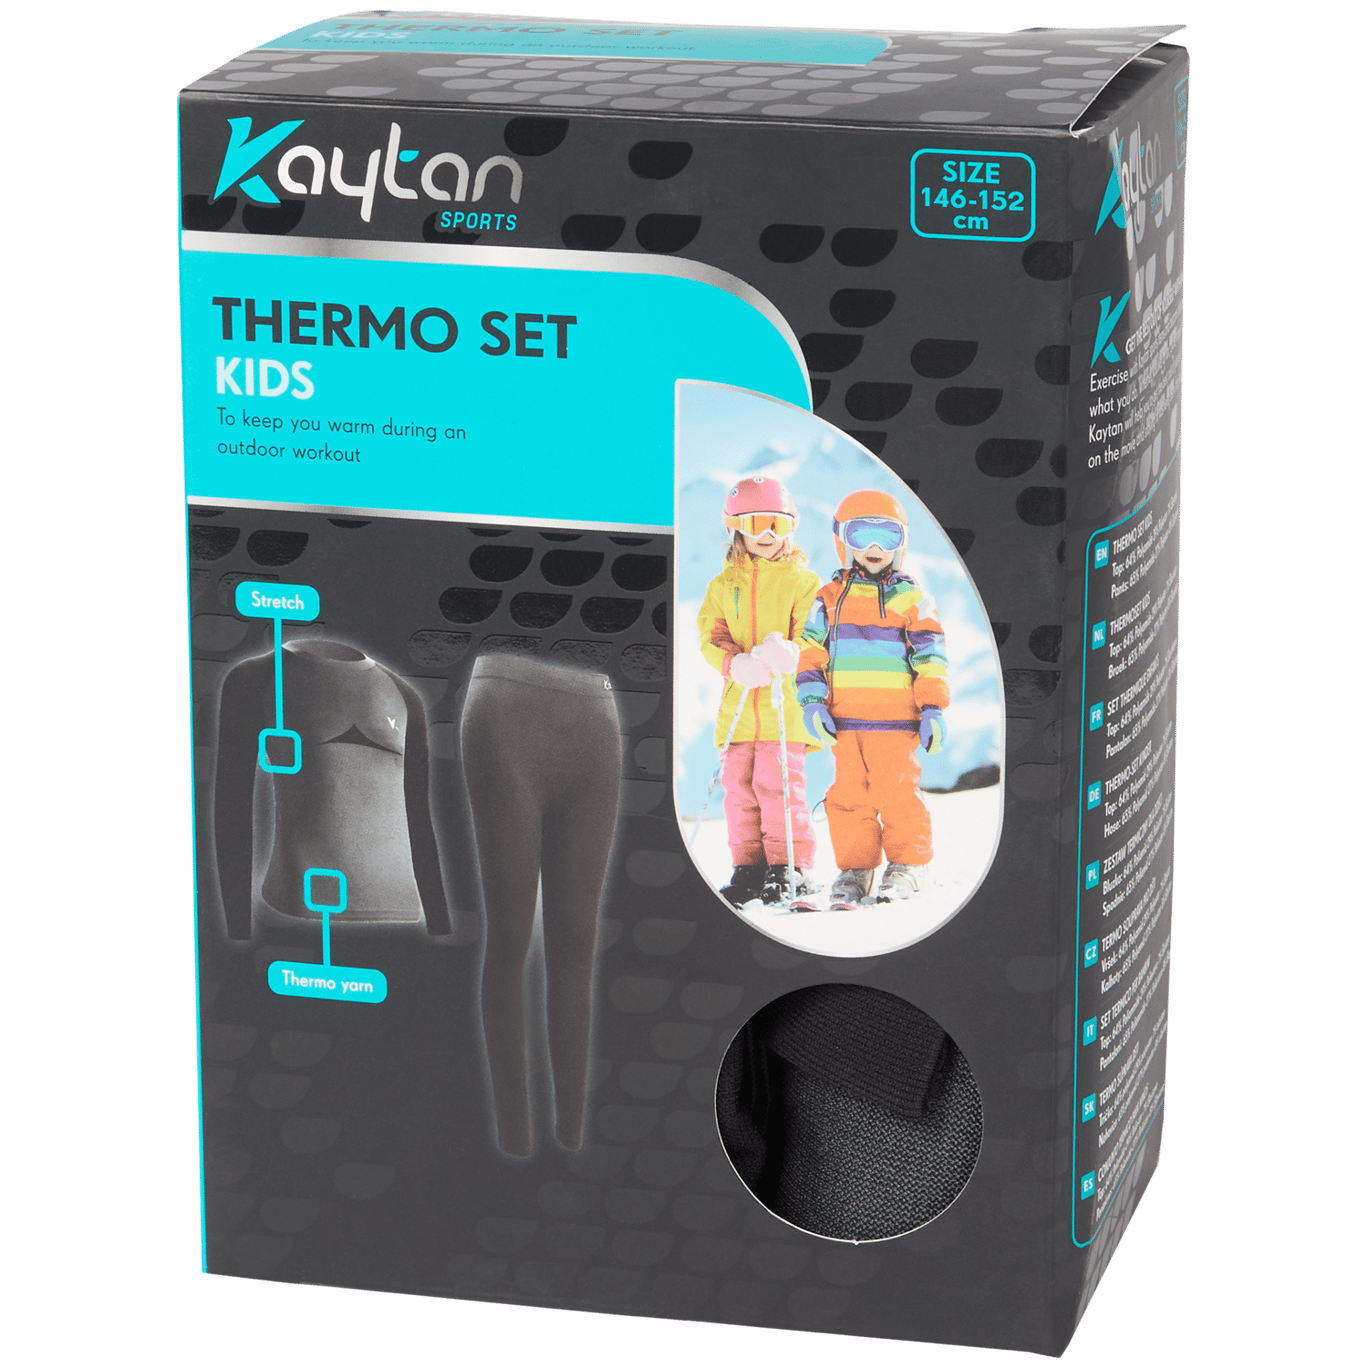 opvoeder Straat Compliment Kaytan thermoset | Action.com